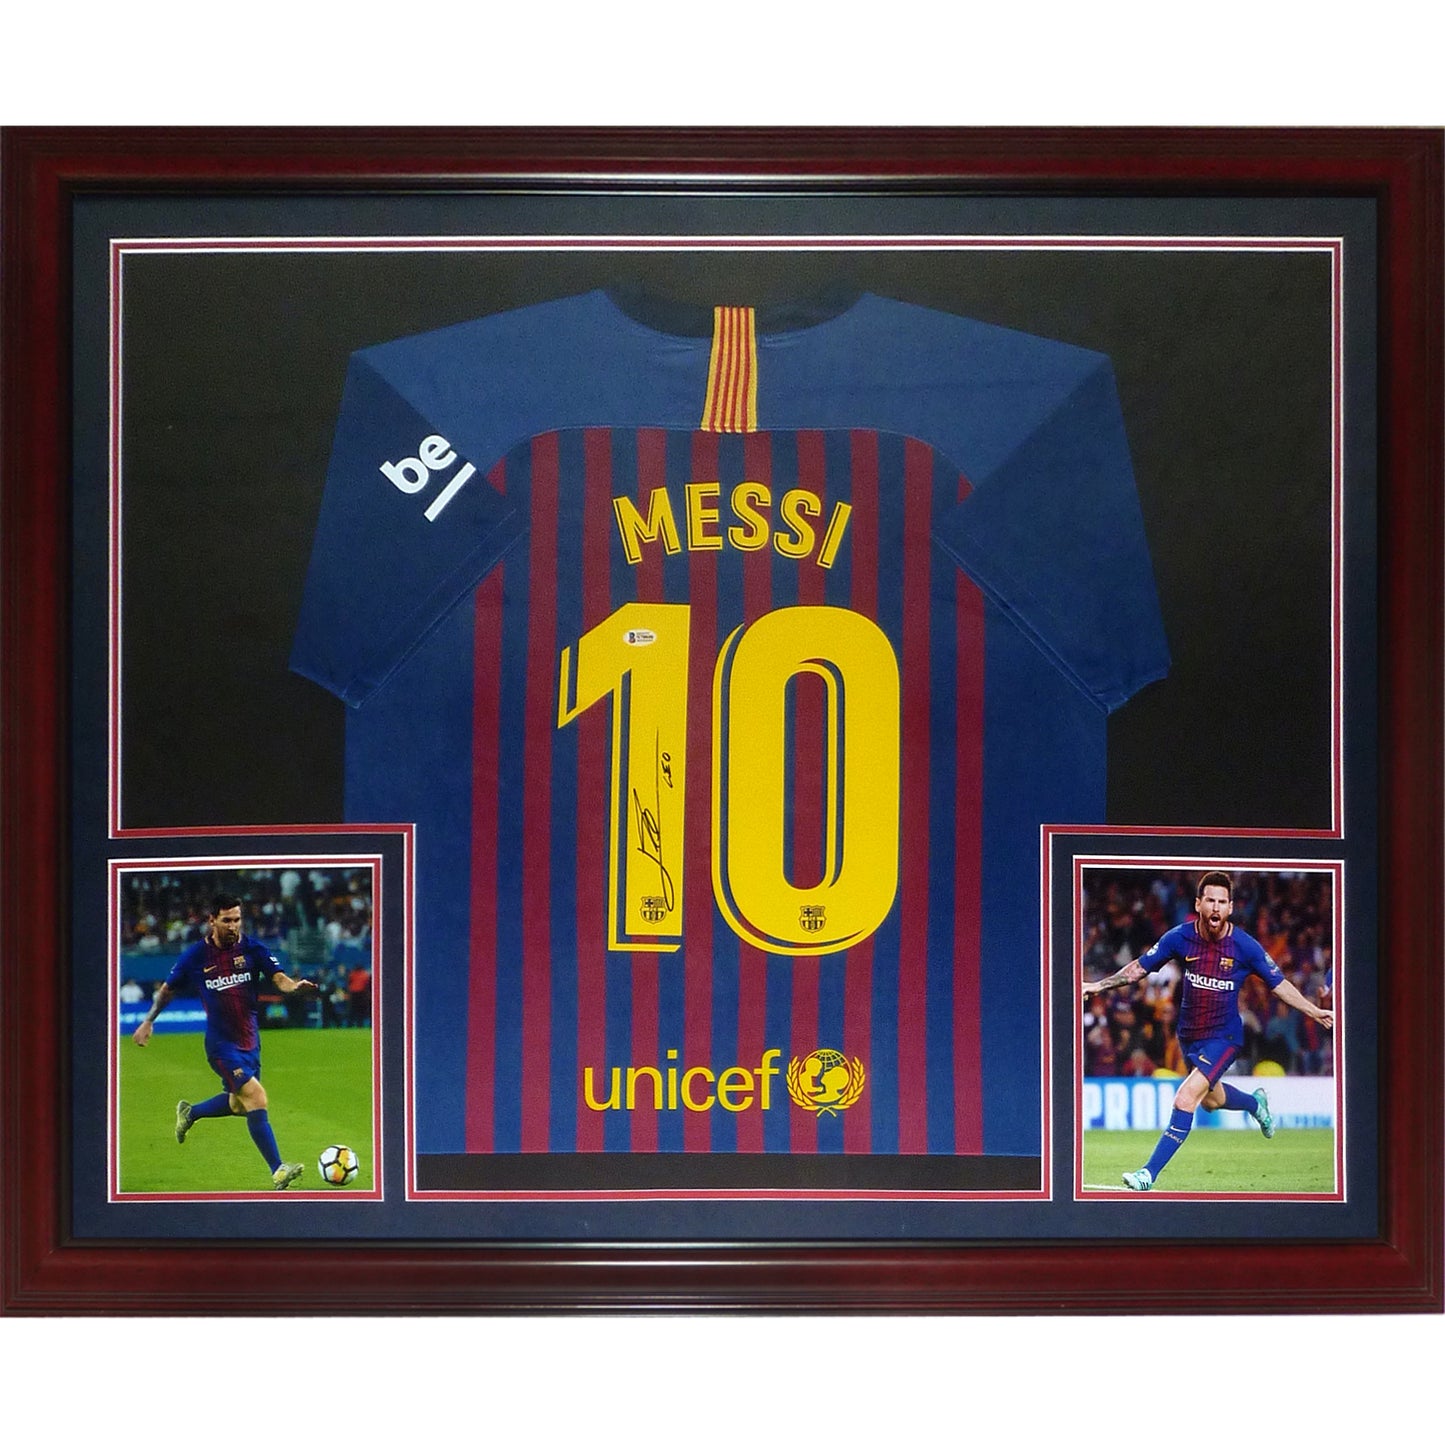 Lionel Messi Autographed FC Barcelona (18-19 Home #10) Deluxe Framed Soccer Jersey - Icons COA